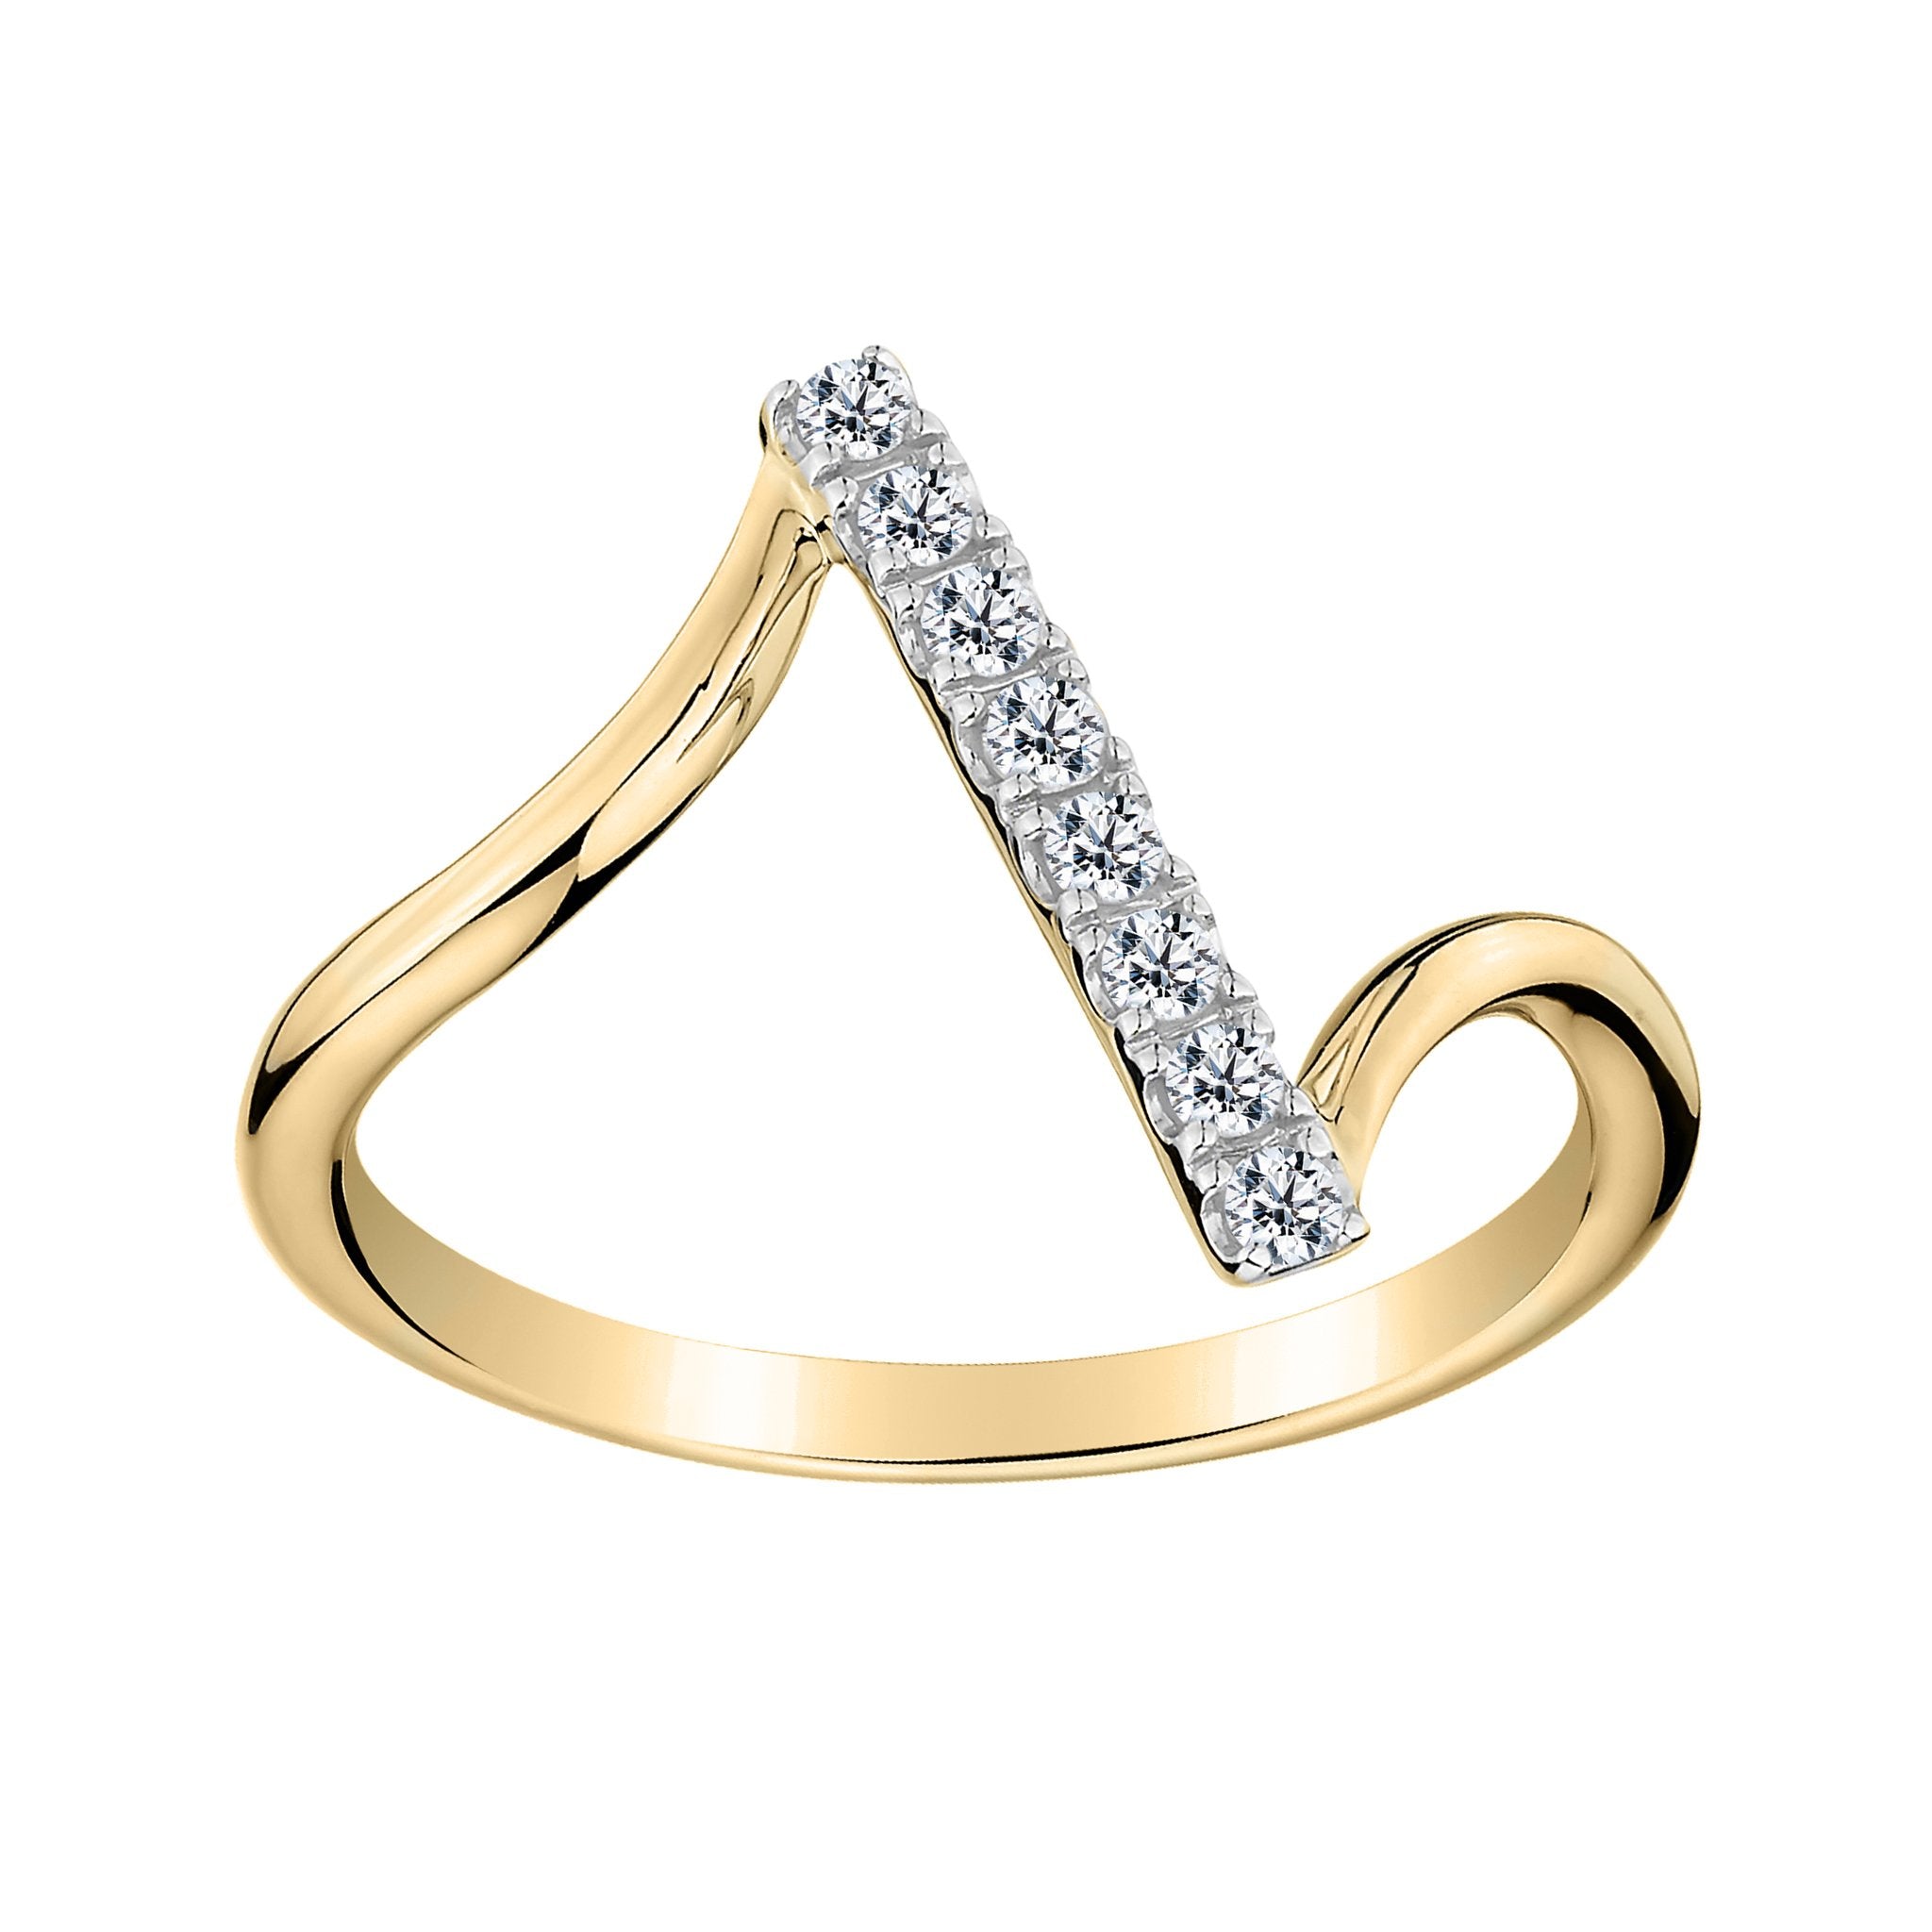 .16 CARAT DIAMOND RING, 10kt YELLOW GOLD. Fashion Rings - Griffin Jewellery Designs